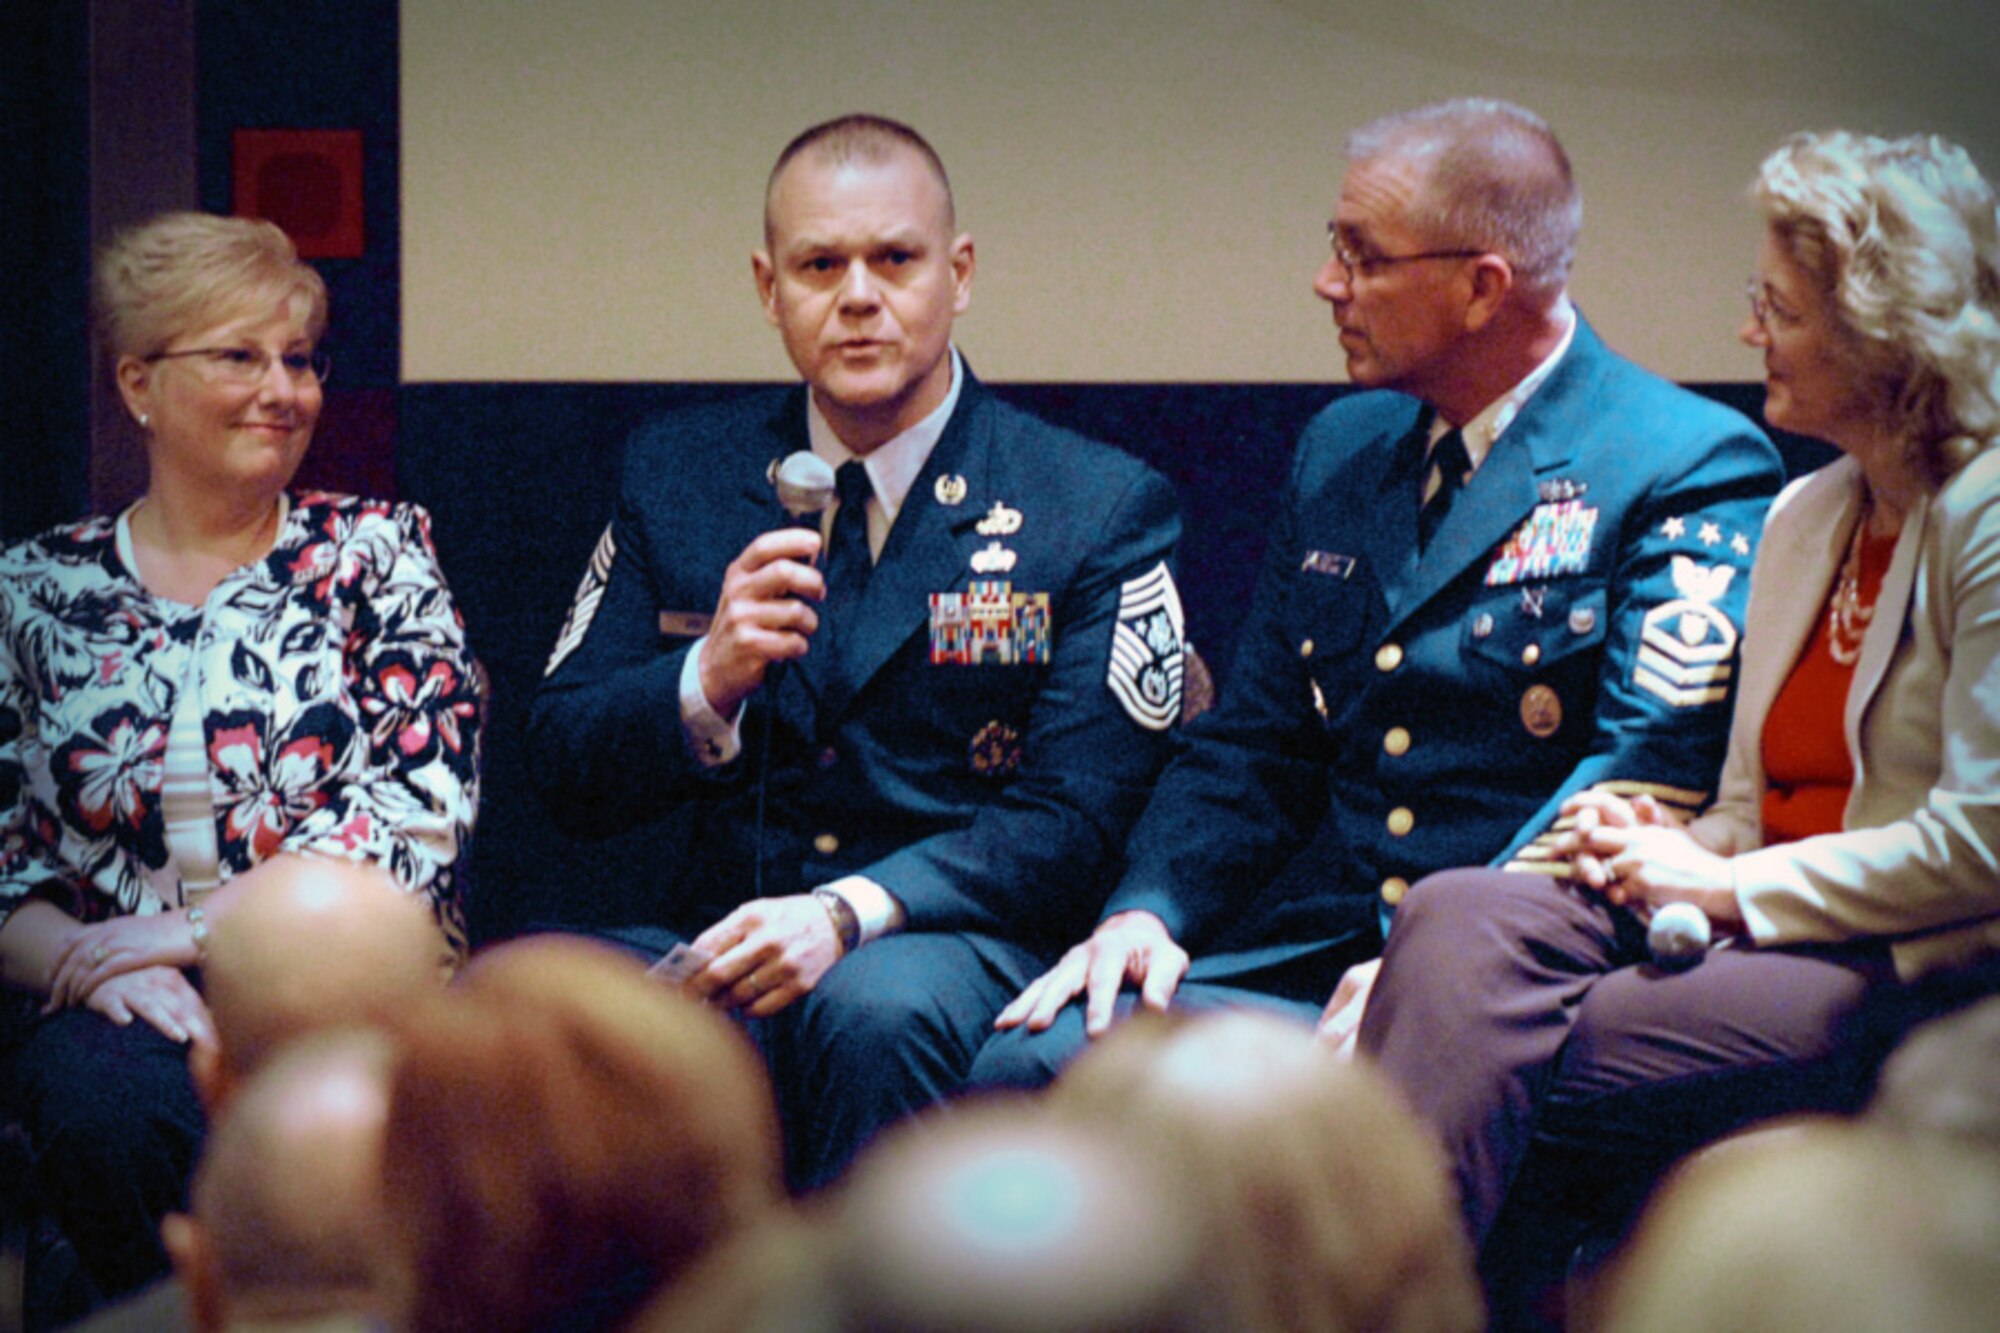 Chief Master Sgt. of the Air Force James A. Roy, with his wife, Paula, by his side, addresses an audience of family support professionals April 28, 2011, during a senior enlisted advisor town hall meeting at the 2011 Family Resilience Conference in Chicago. To his right are Master Chief Petty Officer of the Coast Guard Michael P. Leavitt and his wife, Debbie. (Defense Department photo/Elaine Sanchez)